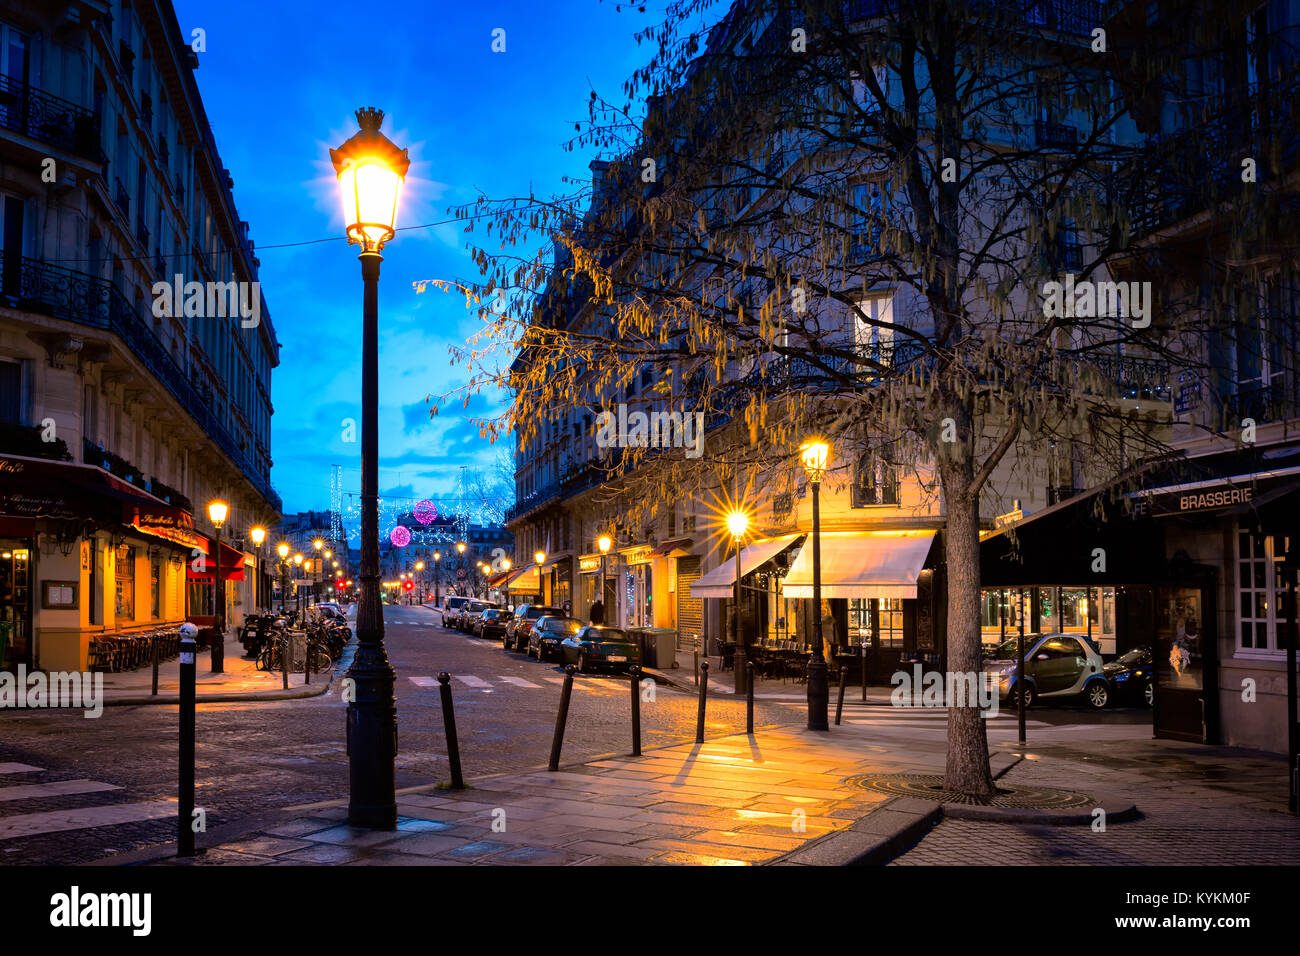 PARIS-JAN 5, 2014: Paris street decorated for the Christmas holiday in one of the oldest neighborhoods in the city, on the island Ile Saint-Louis. Stock Photo